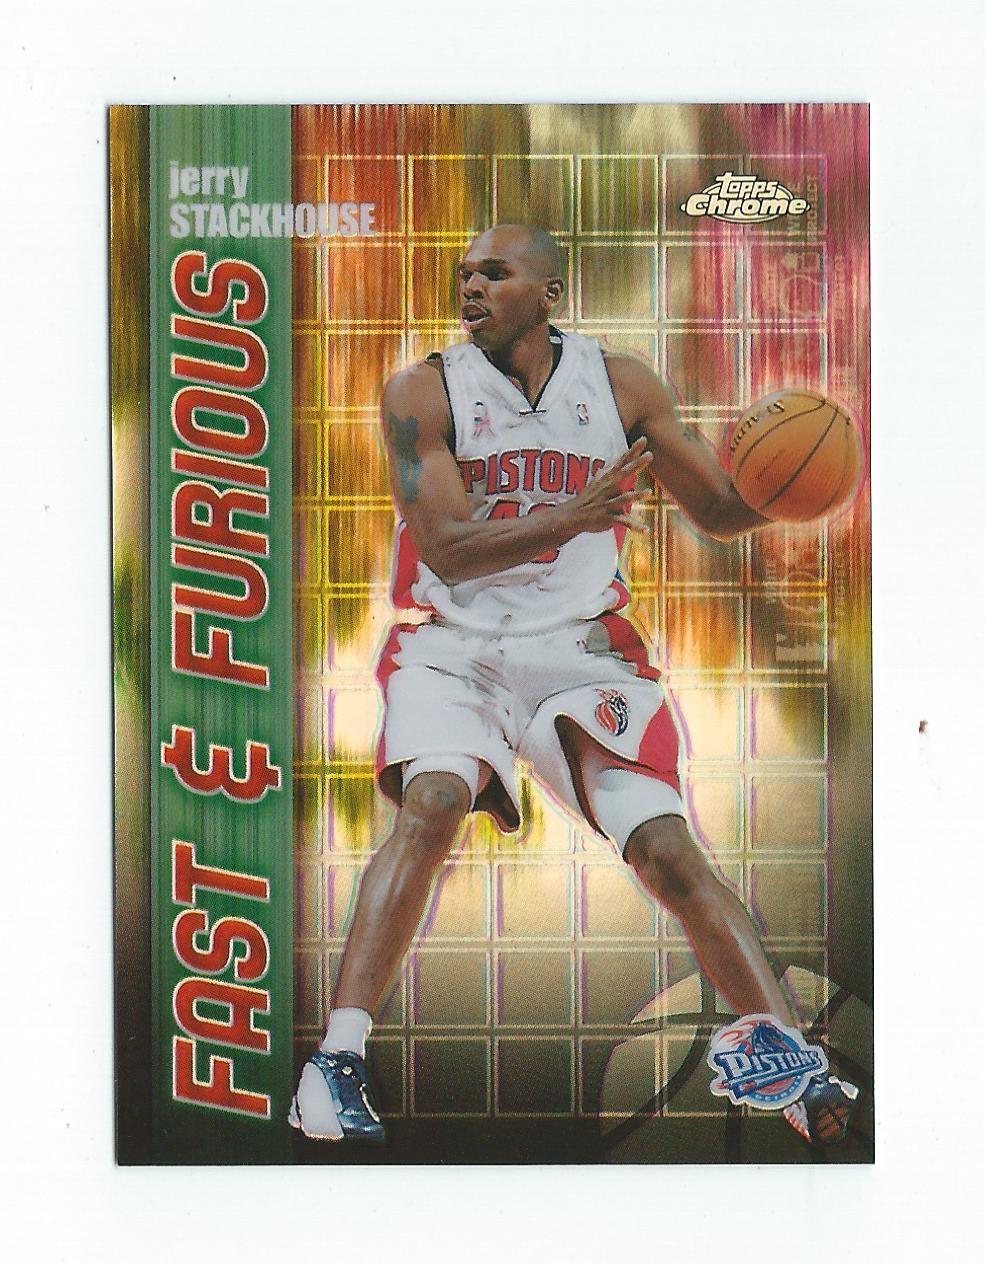 2001-02 Topps Chrome Fast and Furious Refractors #FF11 Jerry Stackhouse